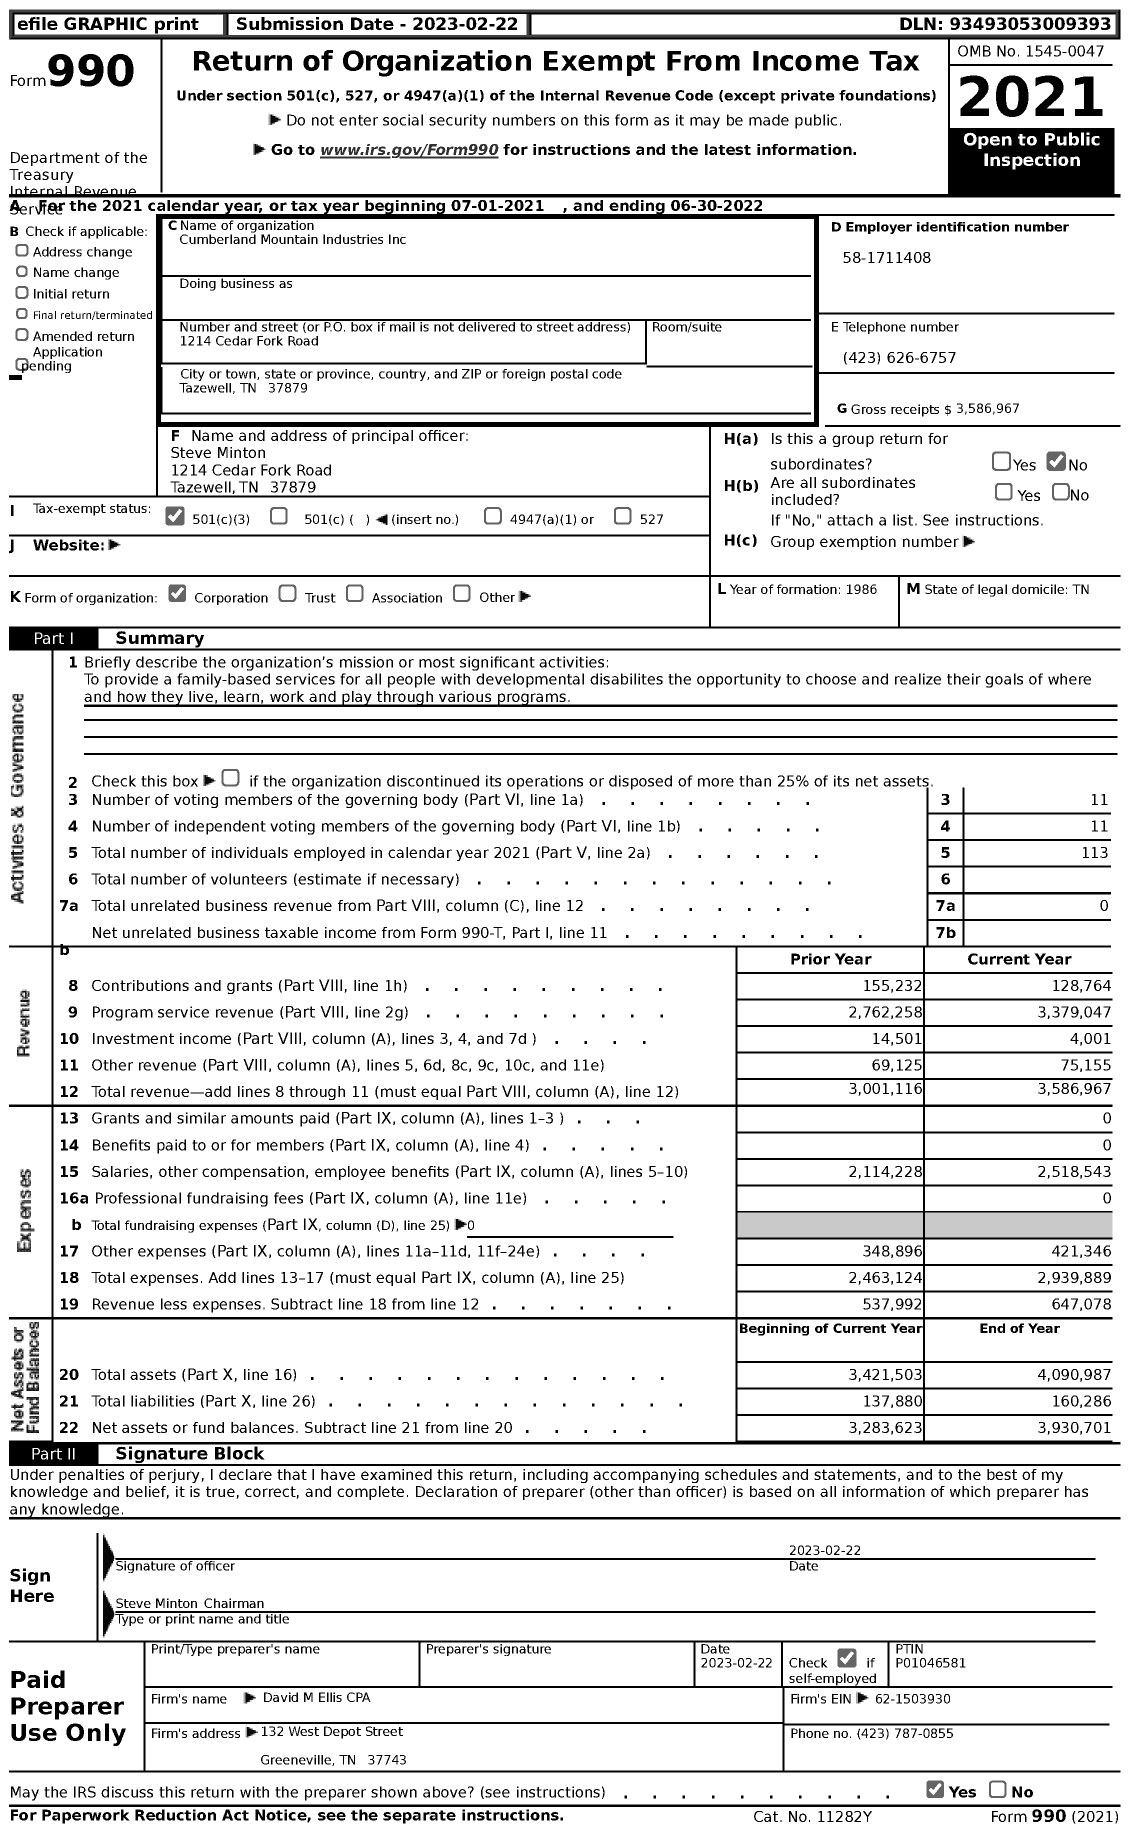 Image of first page of 2021 Form 990 for Cumberland Mountain Industries